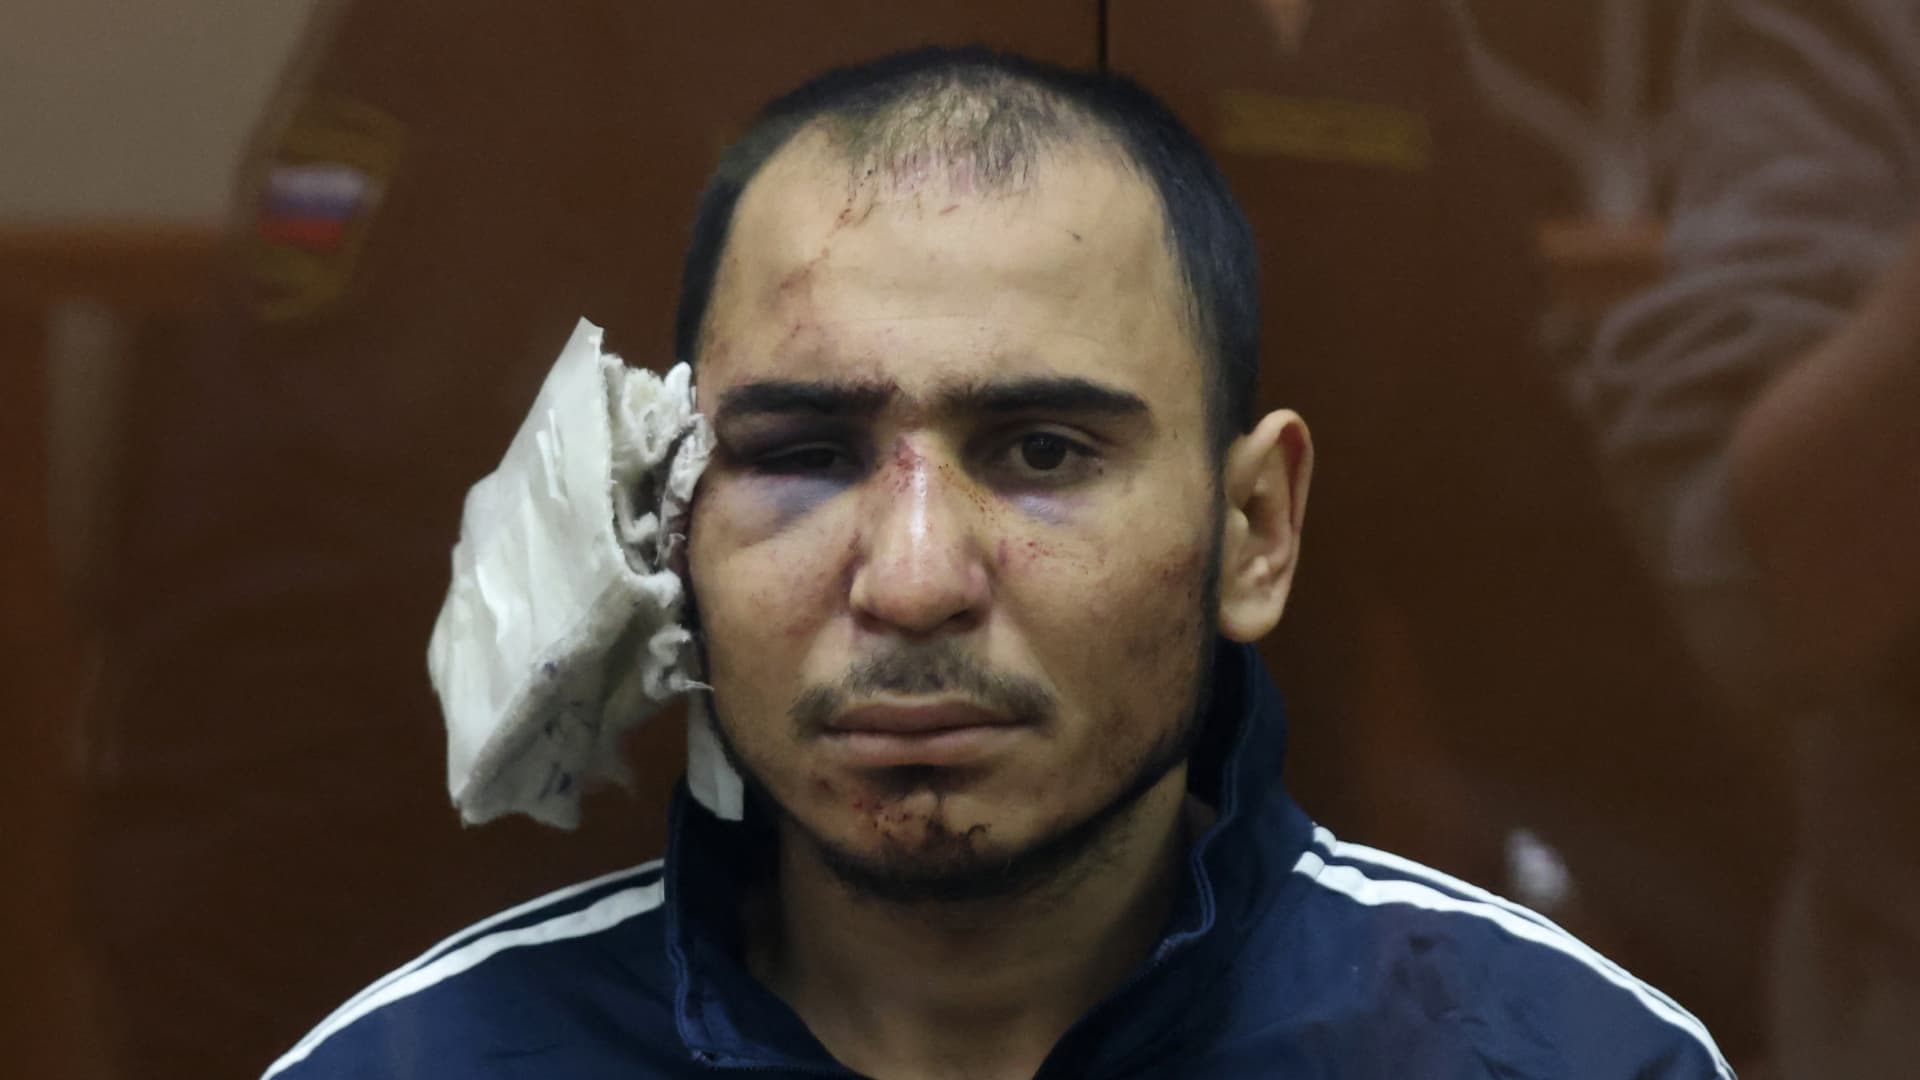 Saidakrami Murodalii Rachabalizoda, suspected of taking part in the attack of a concert hall that killed 137 people, waits for his pre-trial detention hearing at the Basmanny District Court in Moscow on March 24, 2024.